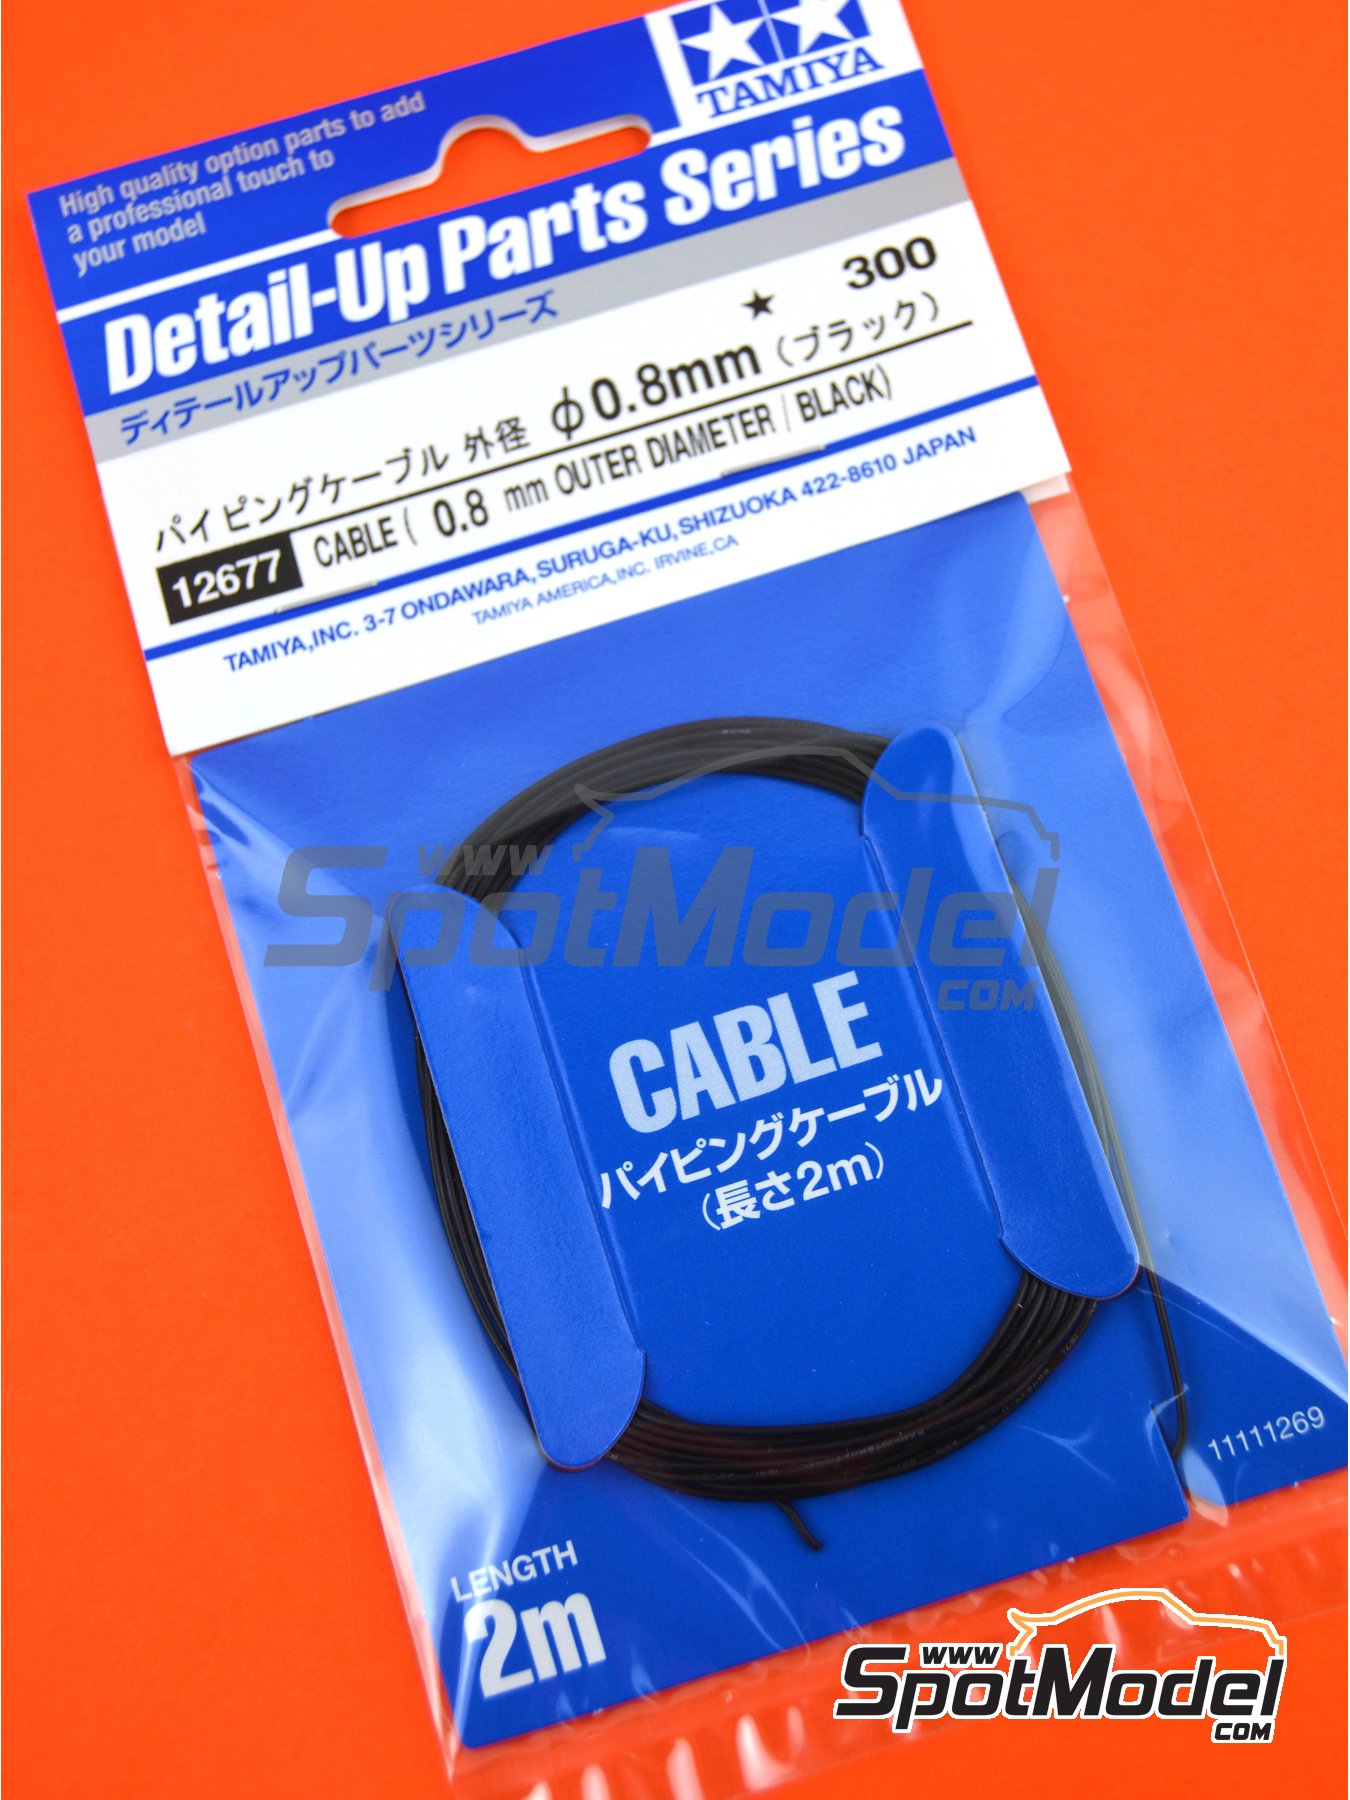 0.8mm Outer Diameter / Black Tamiya Cable